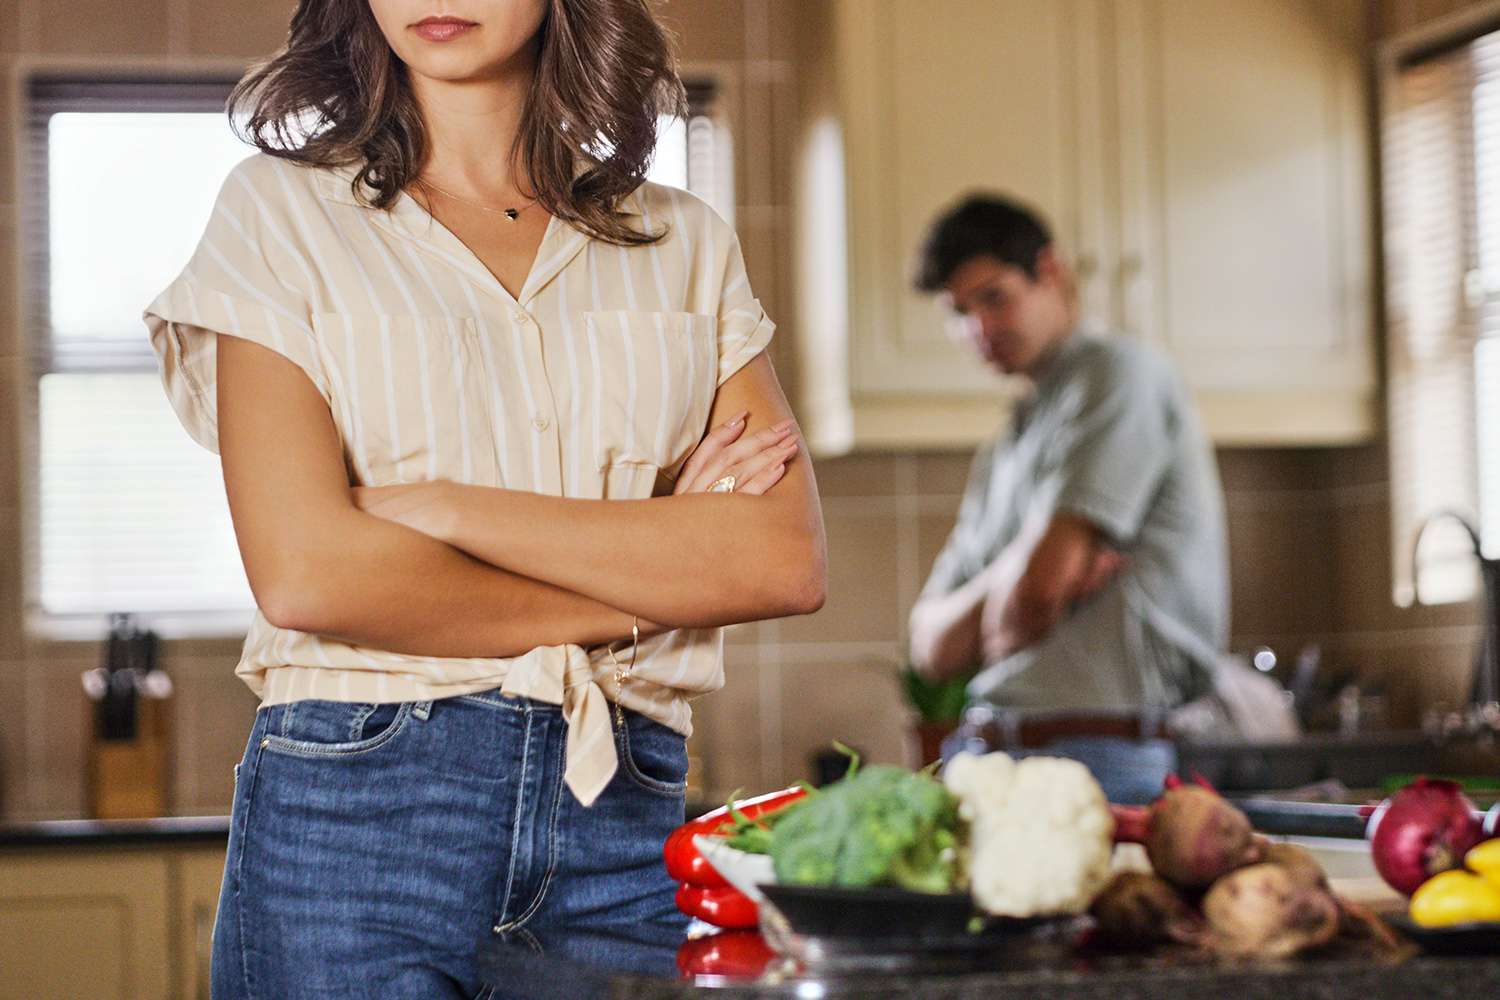 Husband Says He Won't Make Wife Dinner Because She Refuses to Make Him Breakfast: 'She Can Make Her Own'